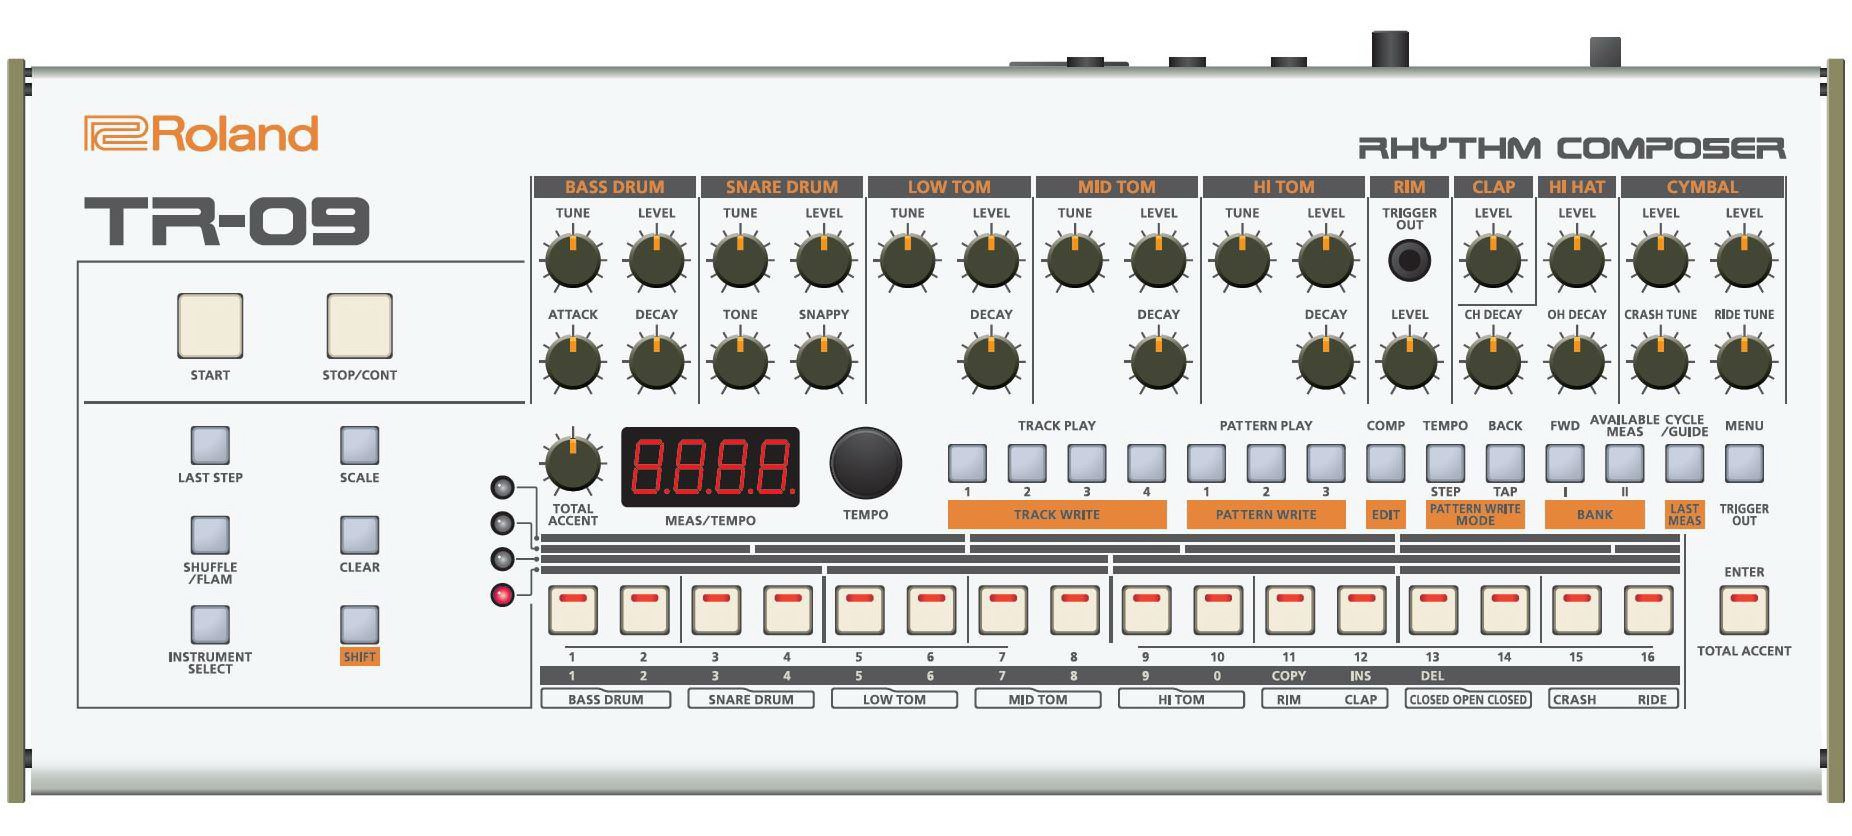  R ROLAND RHYTHM COMPOSER TR-09 START STOP/CONT LAST STEP SCALE SHUFFLE/FLAM CLEAR INSTRUMENT SELECT SHIFT BASS DRUM TUNE LEVEL A